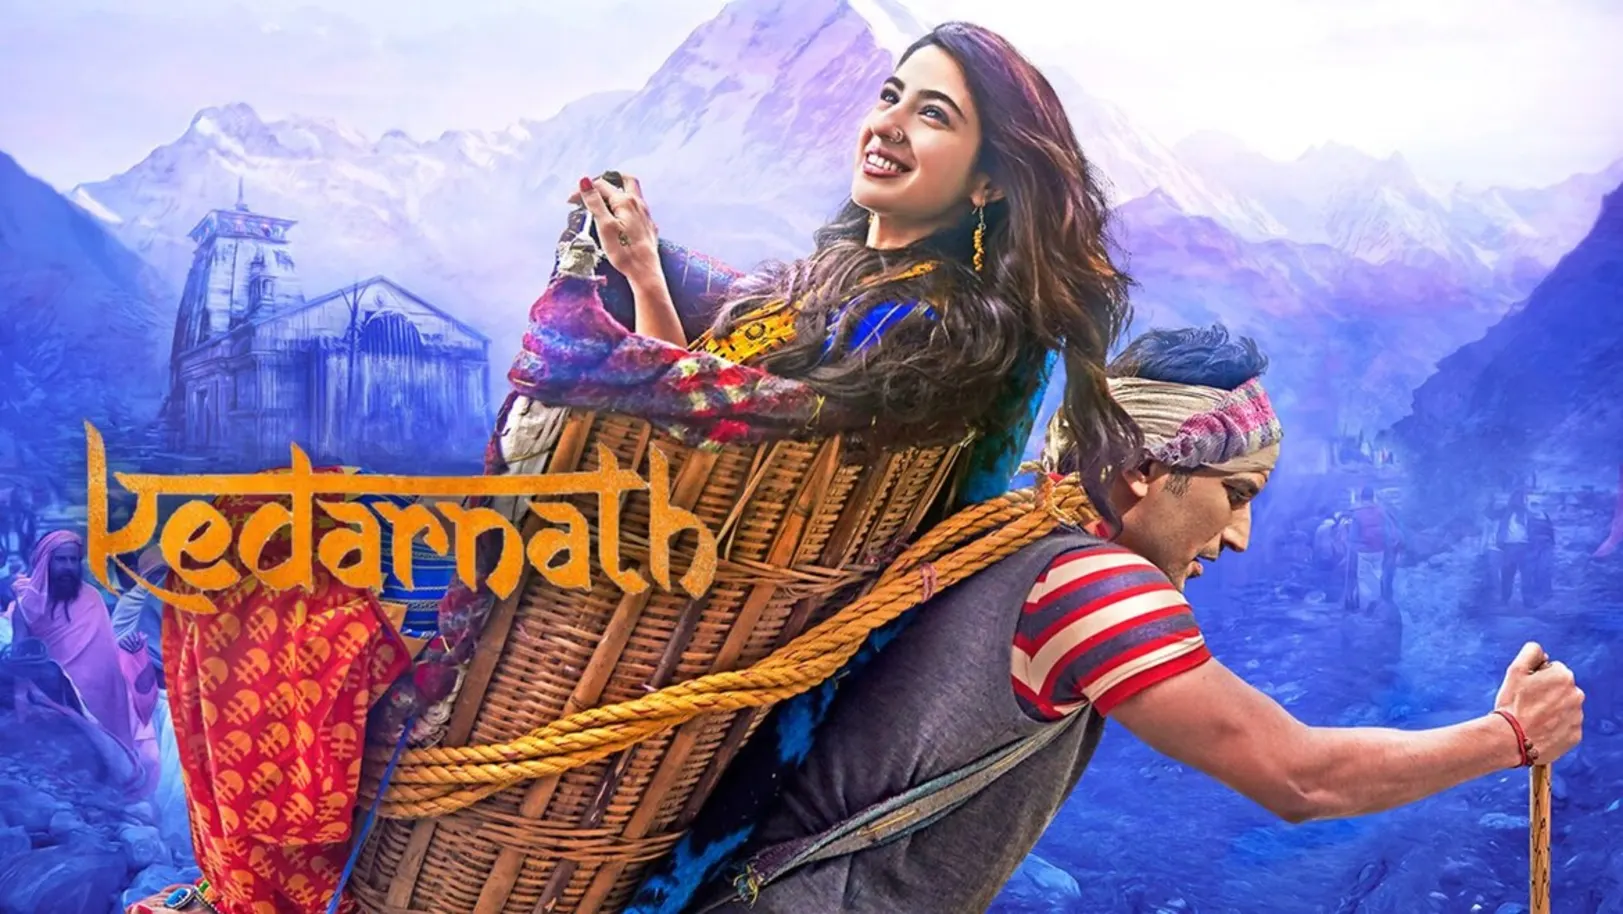 Kedarnath Streaming Now On &Pictures HD